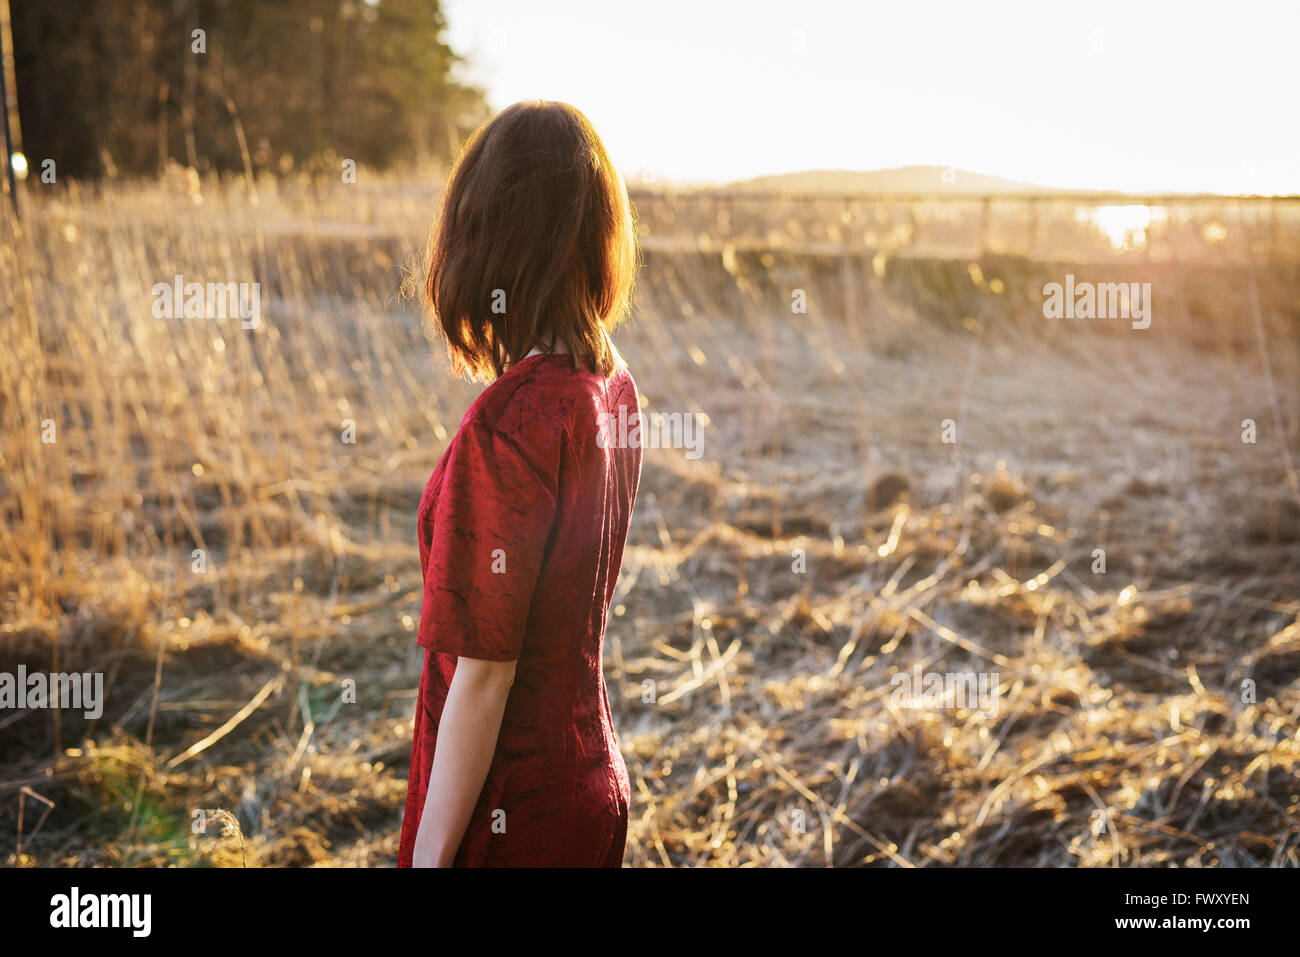 Finland, Varsinais-Suomi, Young woman standing in field Stock Photo